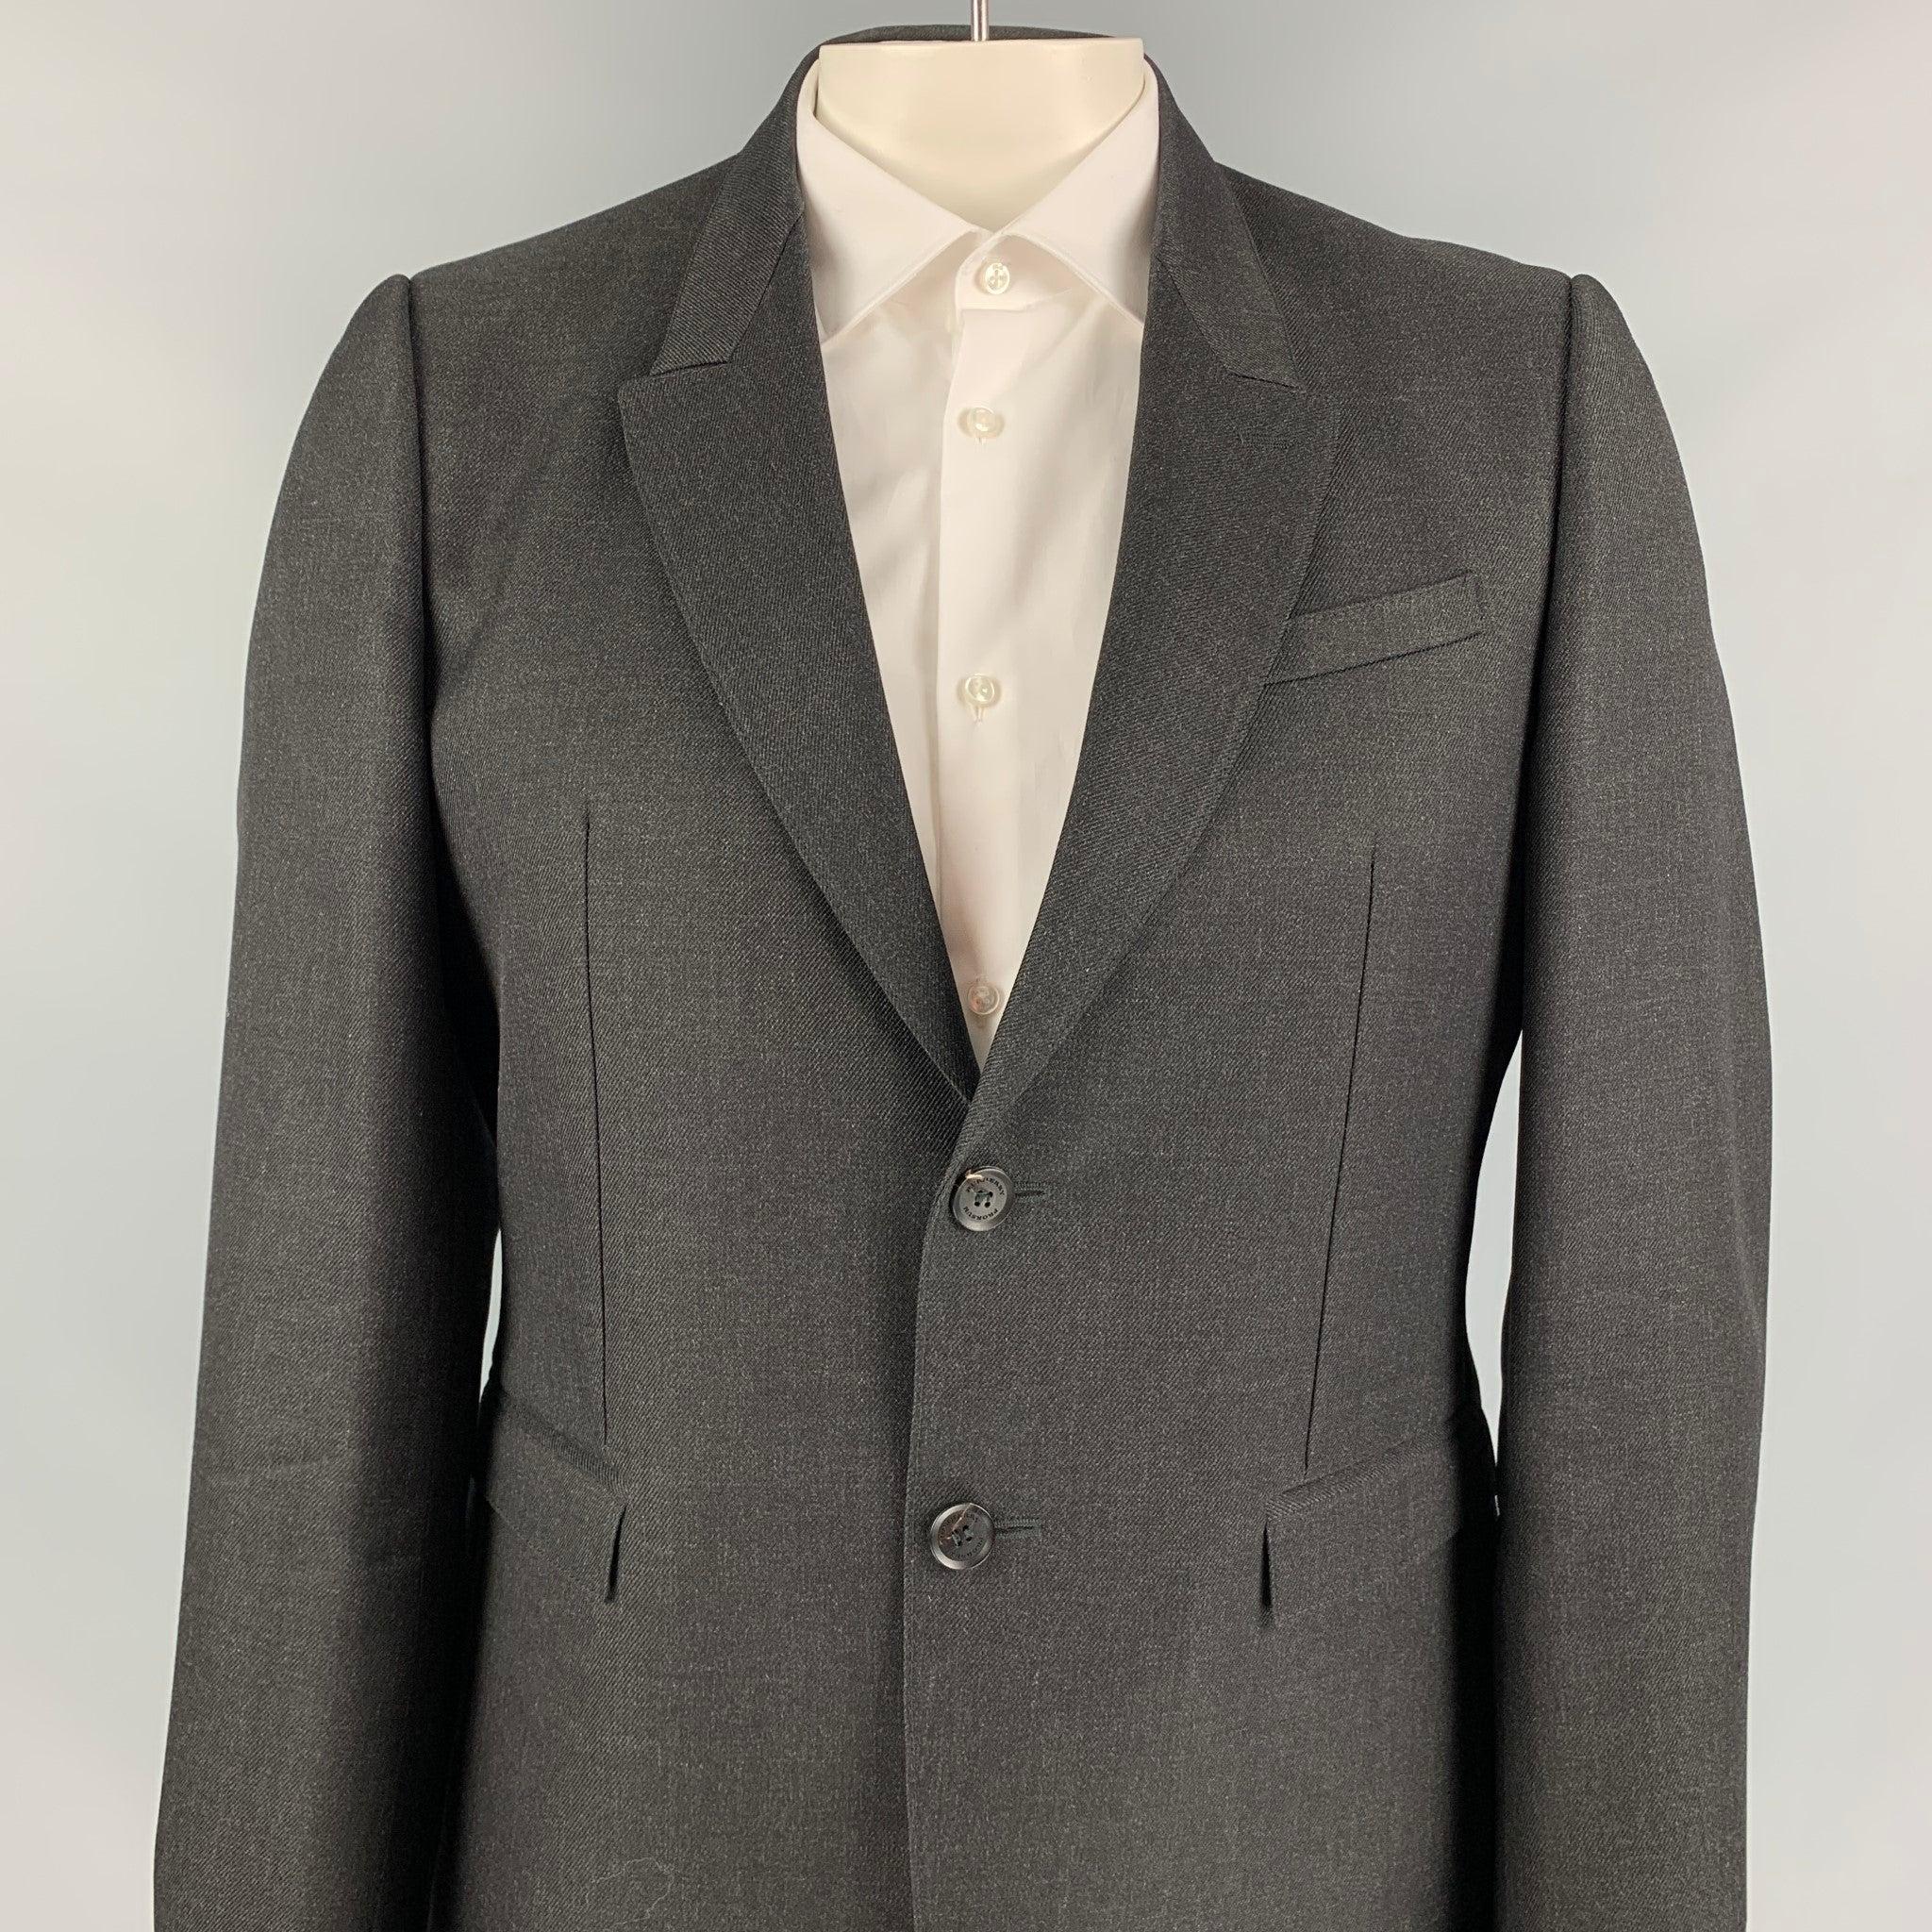 BURBERRY PRORSUM sport coat comes in a charcoal wool with a full liner featuring a peak lapel, flap pockets, double back vent, and a two button closure. Made in Italy.Excellent
Pre-Owned Condition.  

Marked:   54 

Measurements: 
 
Shoulder: 18